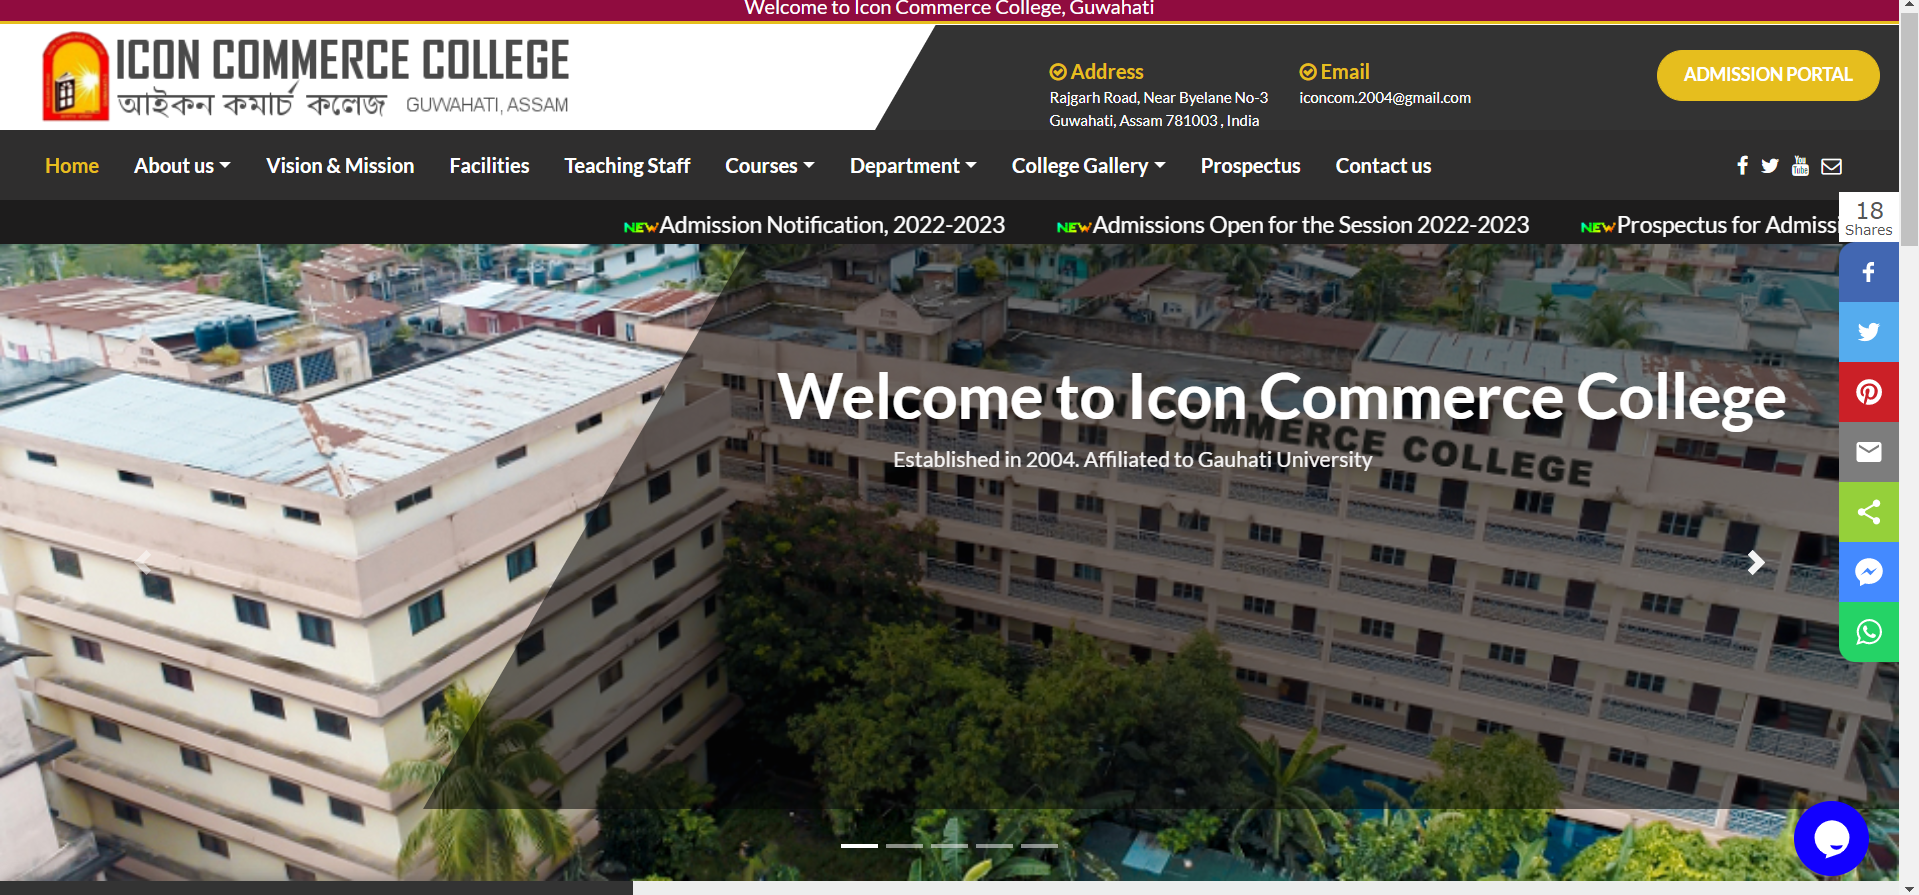 Icon commerce college, commerce colleges in Guwahati